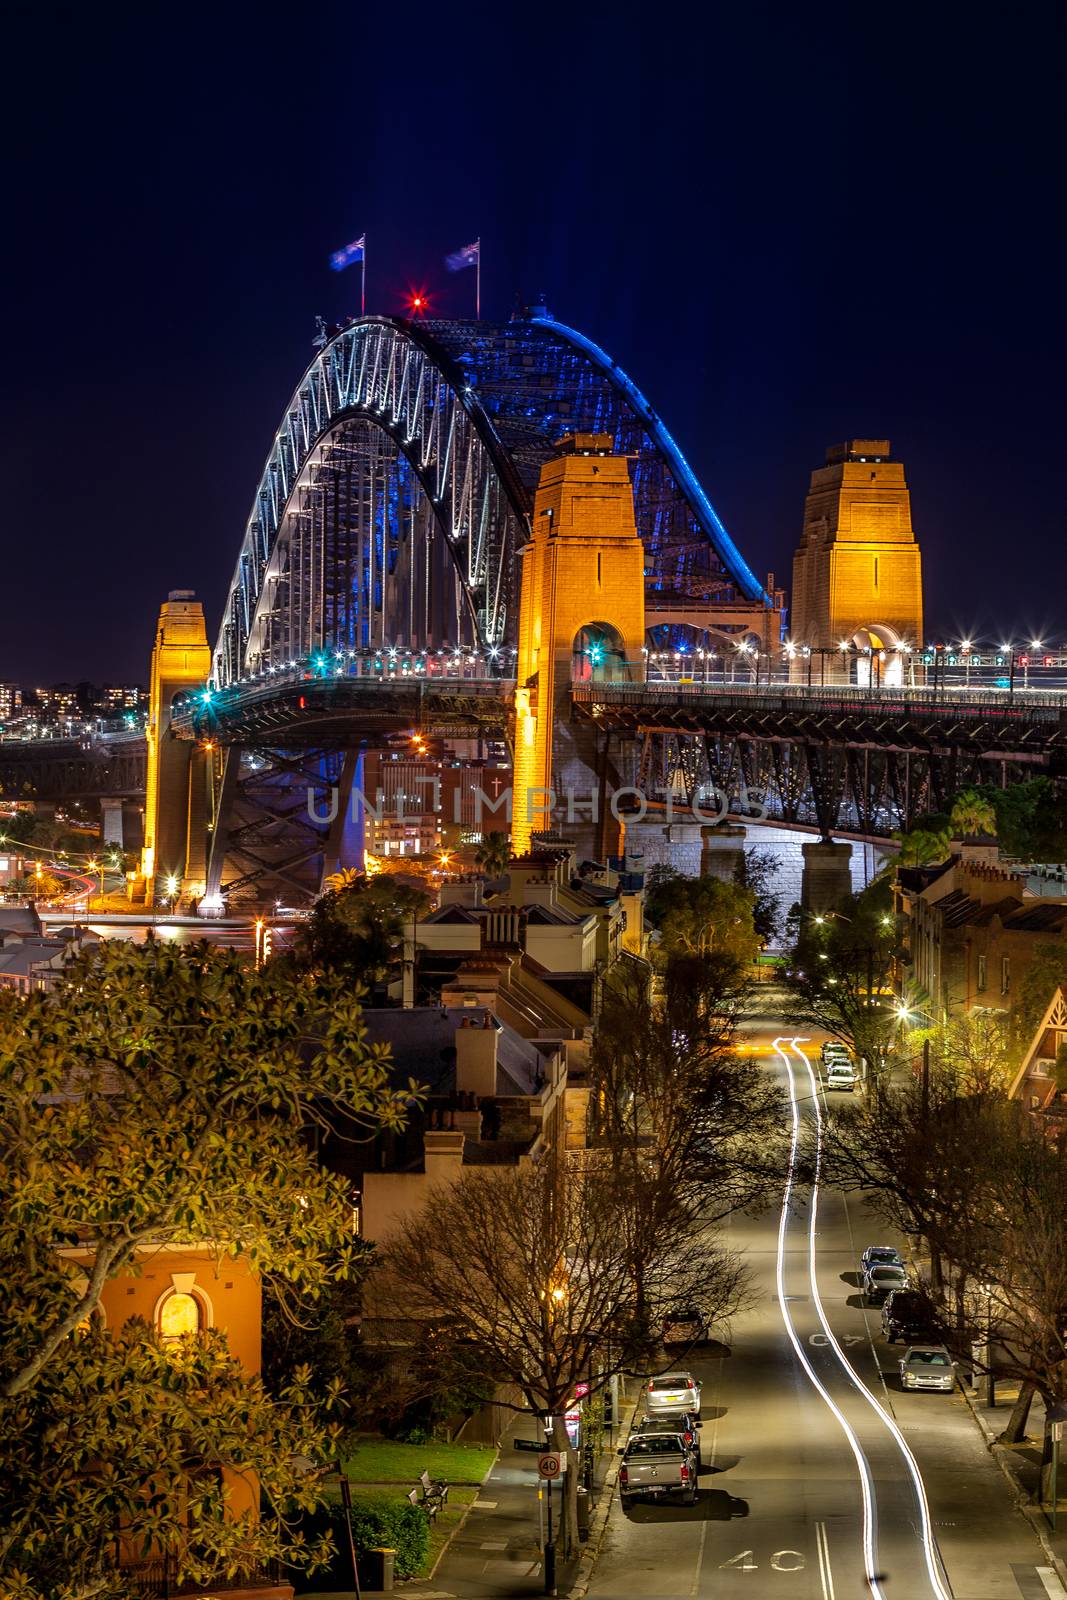 Views down the road towards Sydney Harbour Bridge at night by lovleah